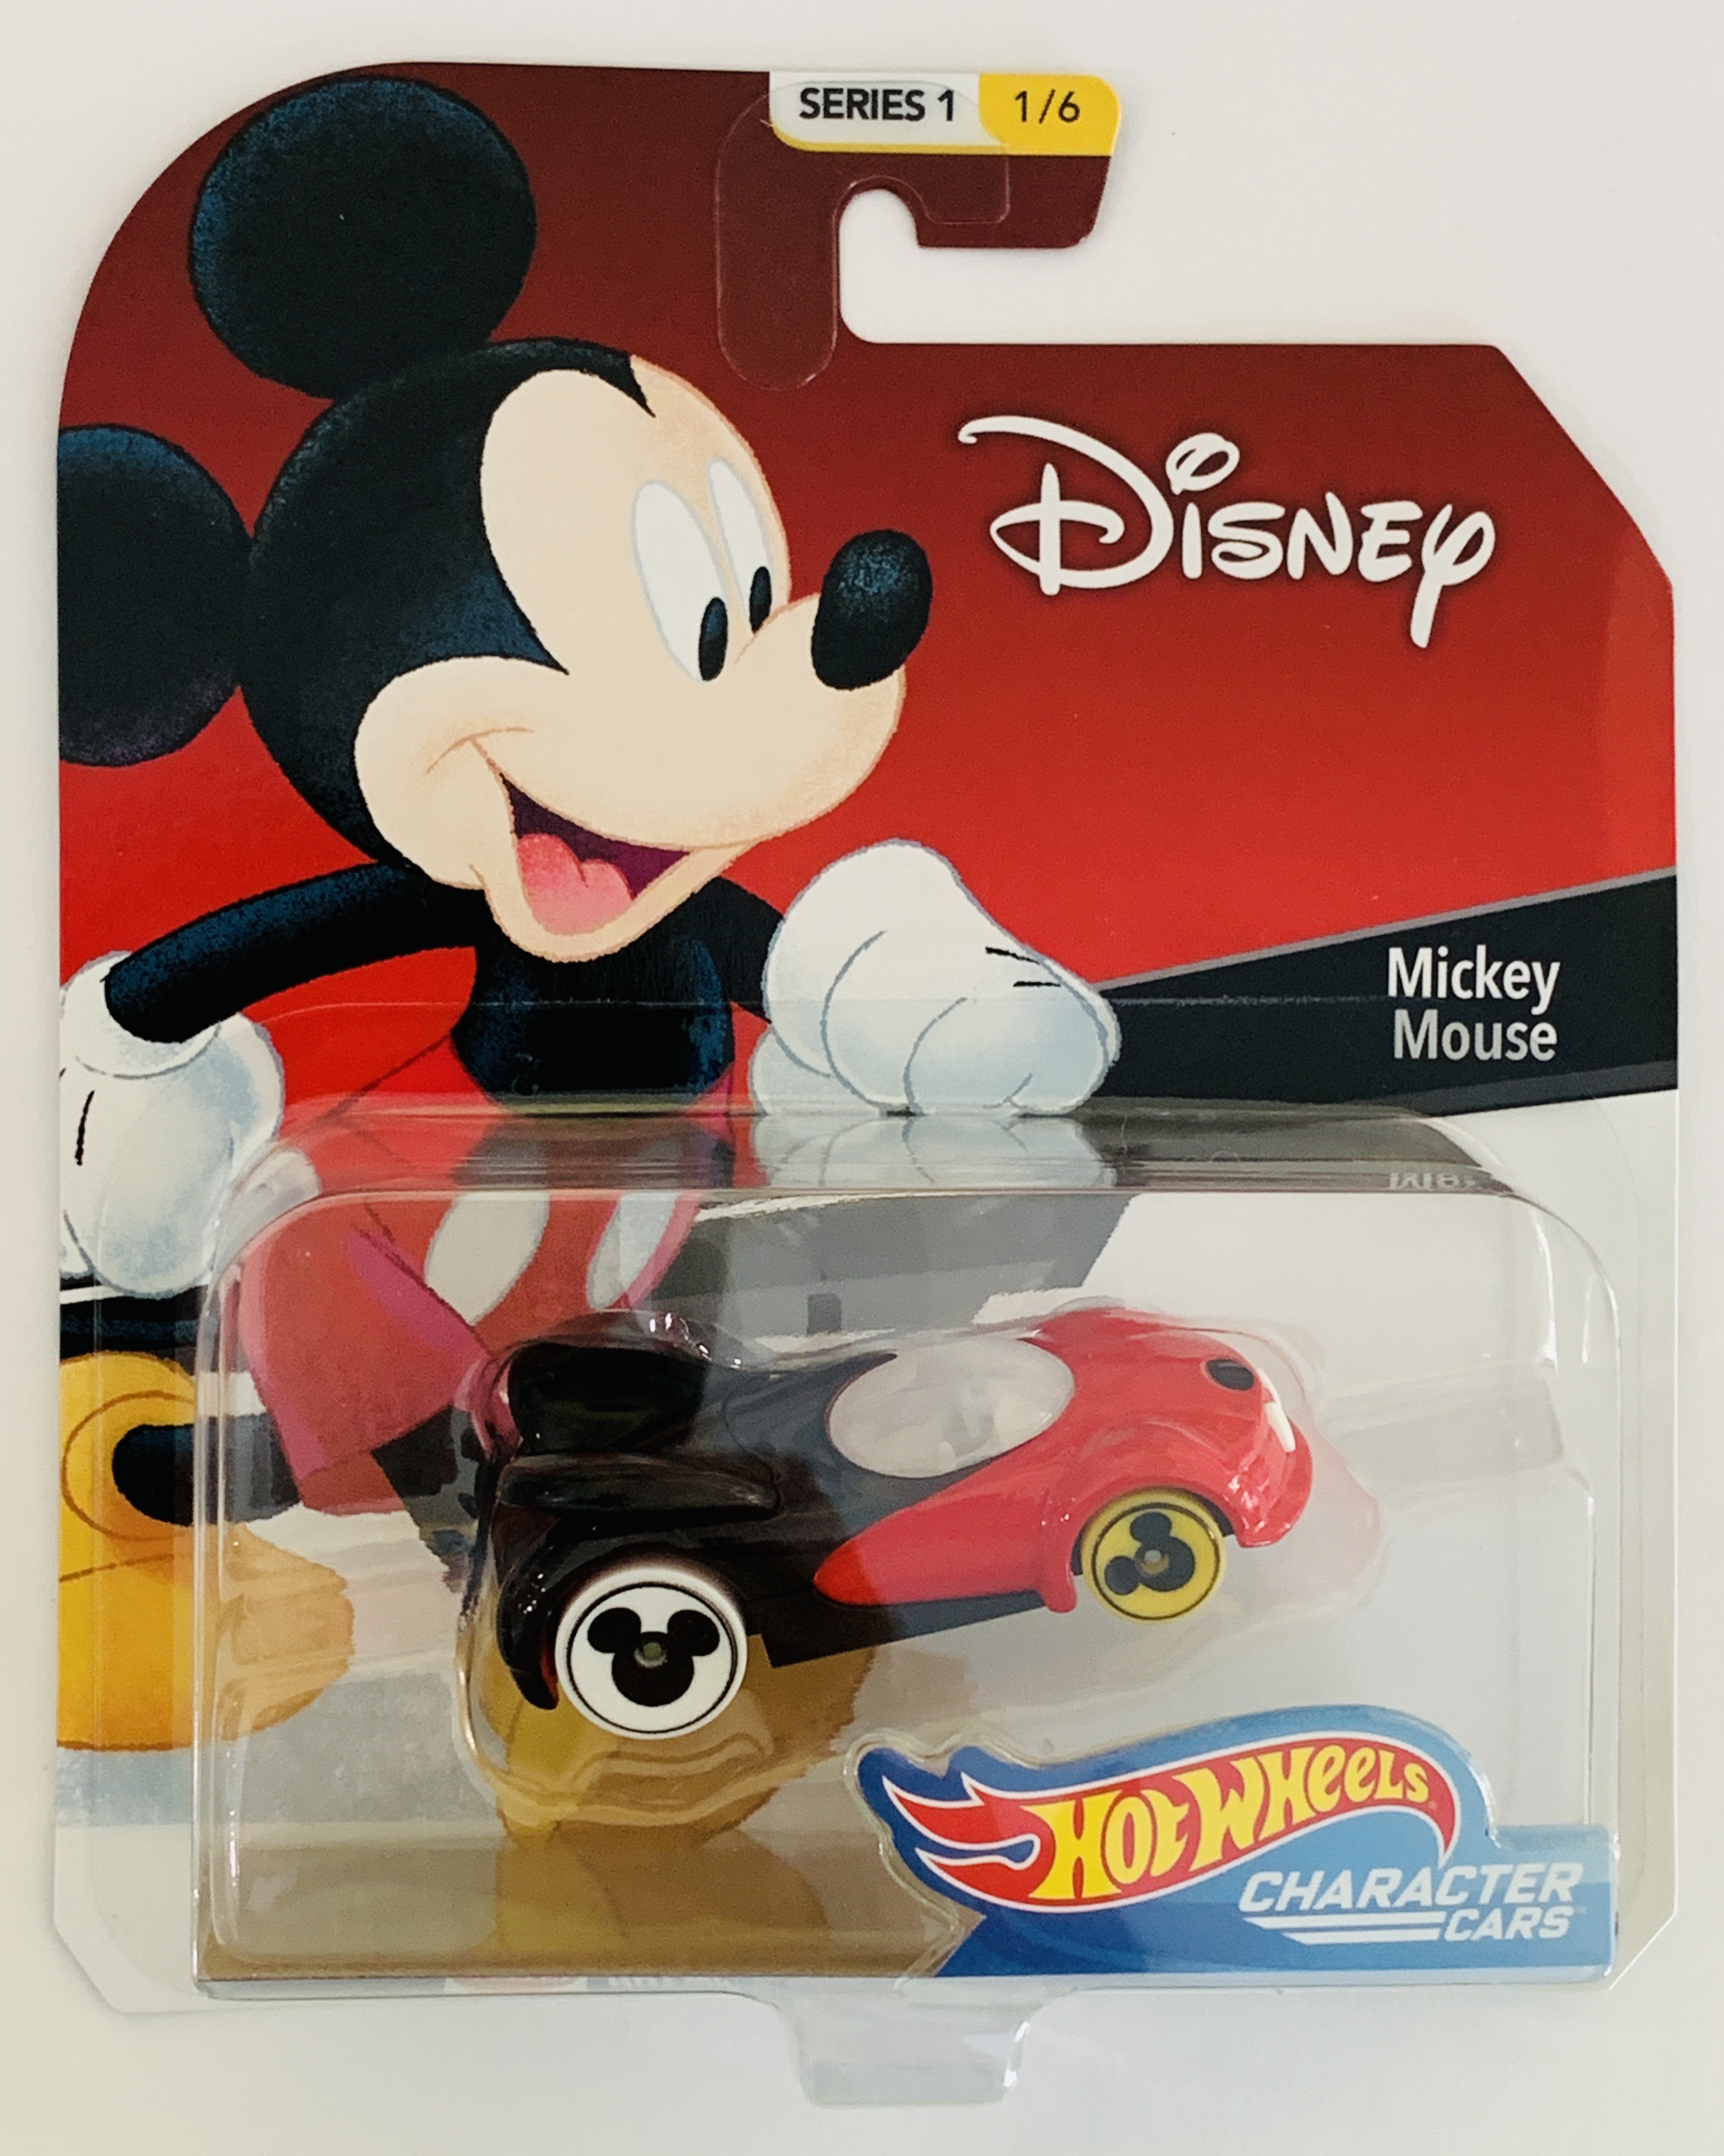 Hot Wheels Series 1 Disney Character Cars Micky Mouse